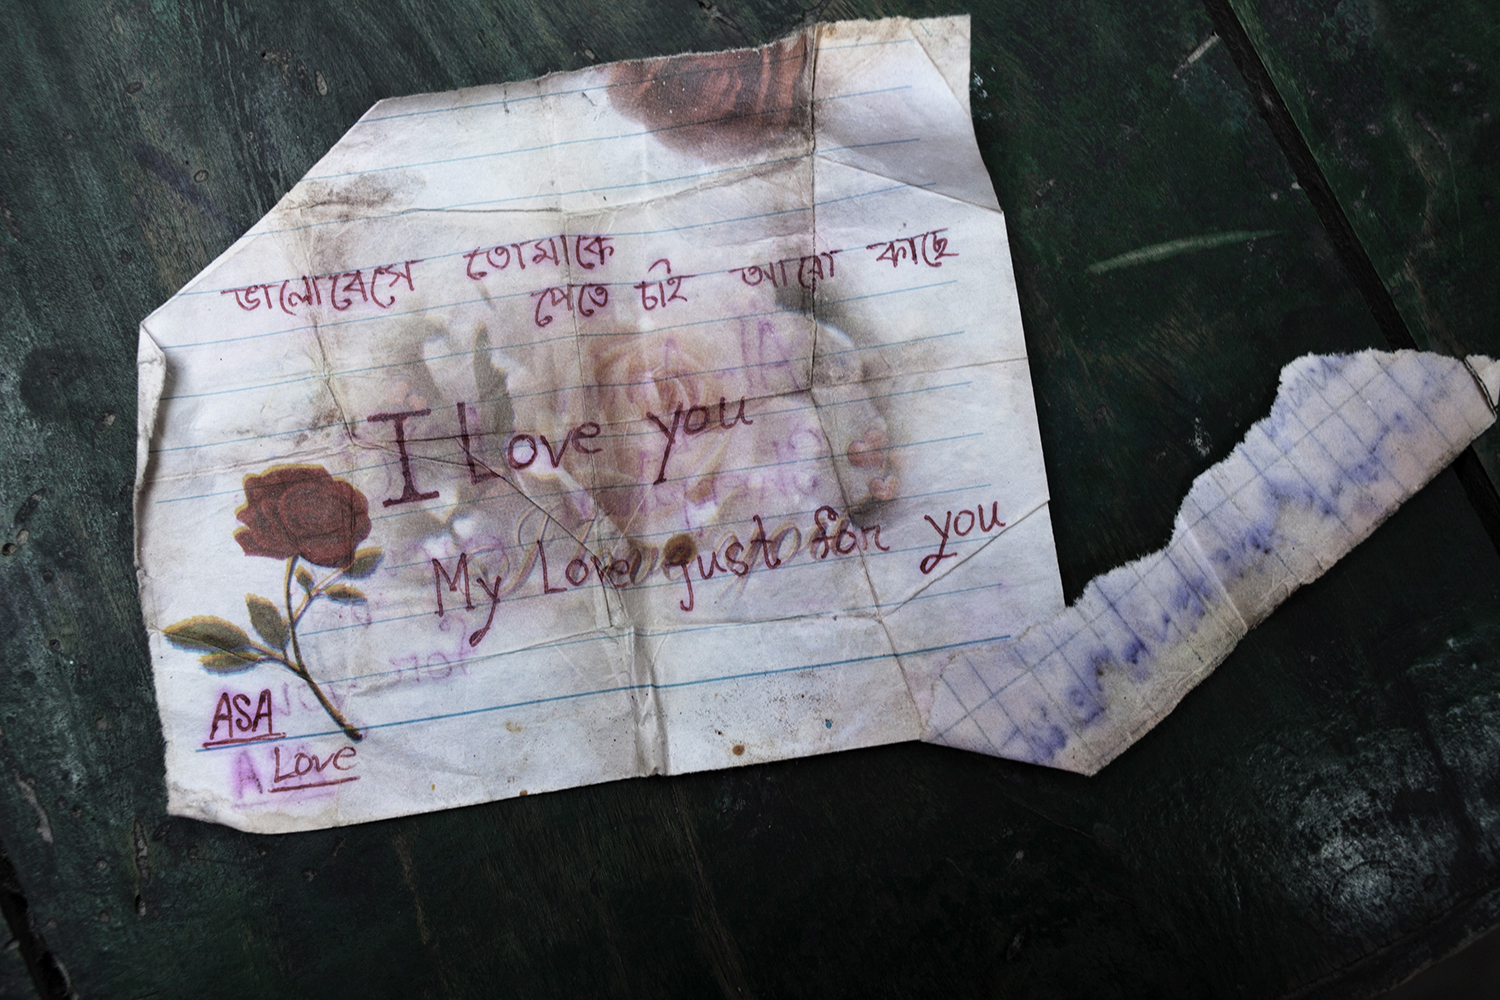 After identification of dead body of Al Amin (18), a  worker from Rana Plaza and brother of missing worker Shaheen Reza, his family gets this letter from Al Amins pocket that his girl friend write to him. Al Amin was a good student. He gave SSC ( School secondary Certificate) exam and after his death the result has been published and he has got grade A.  After giving exam Al amin think he can earn and support family. Rana Plaza, the 8- stored building where 5 garment factory were running, has collapsed on 24th April 2013 and 1131 workers dead so far. Panch bibi, Joypur Hat, Bangladesh. 2nd June 2013